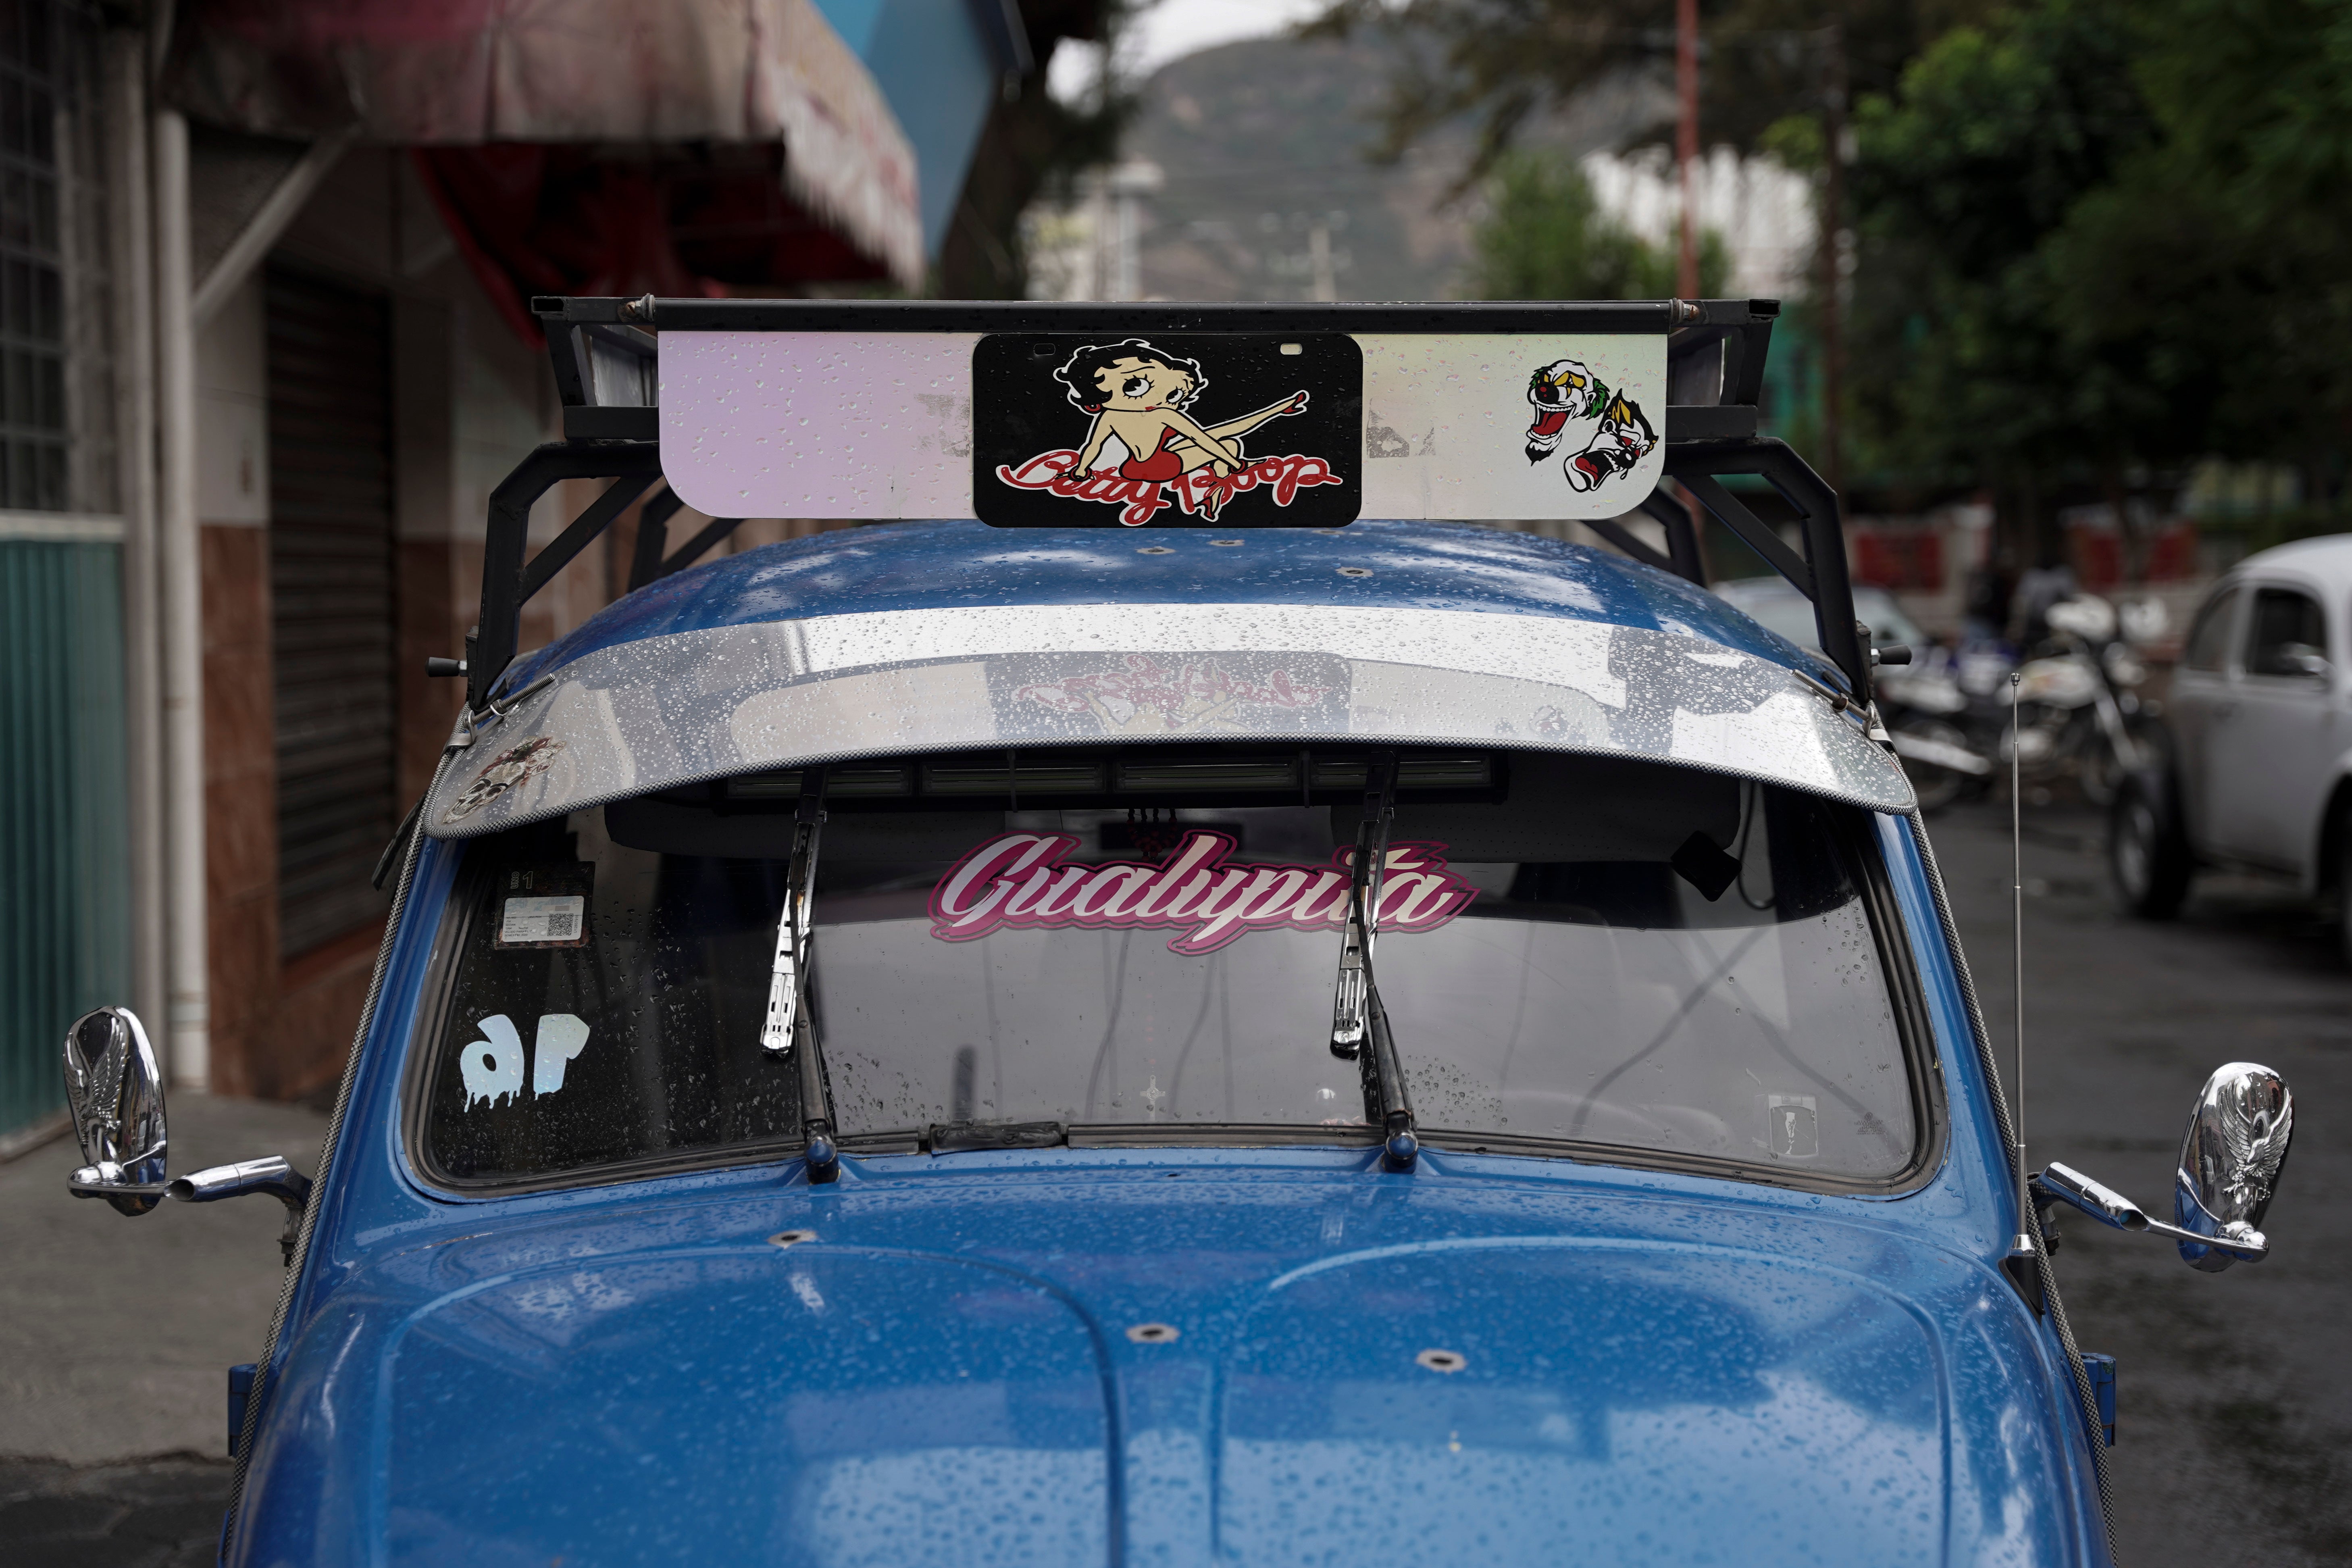 The bright blue Volkswagen Beetle owned by taxi driver Claudio Garcia that he named “Gualupita” after his wife